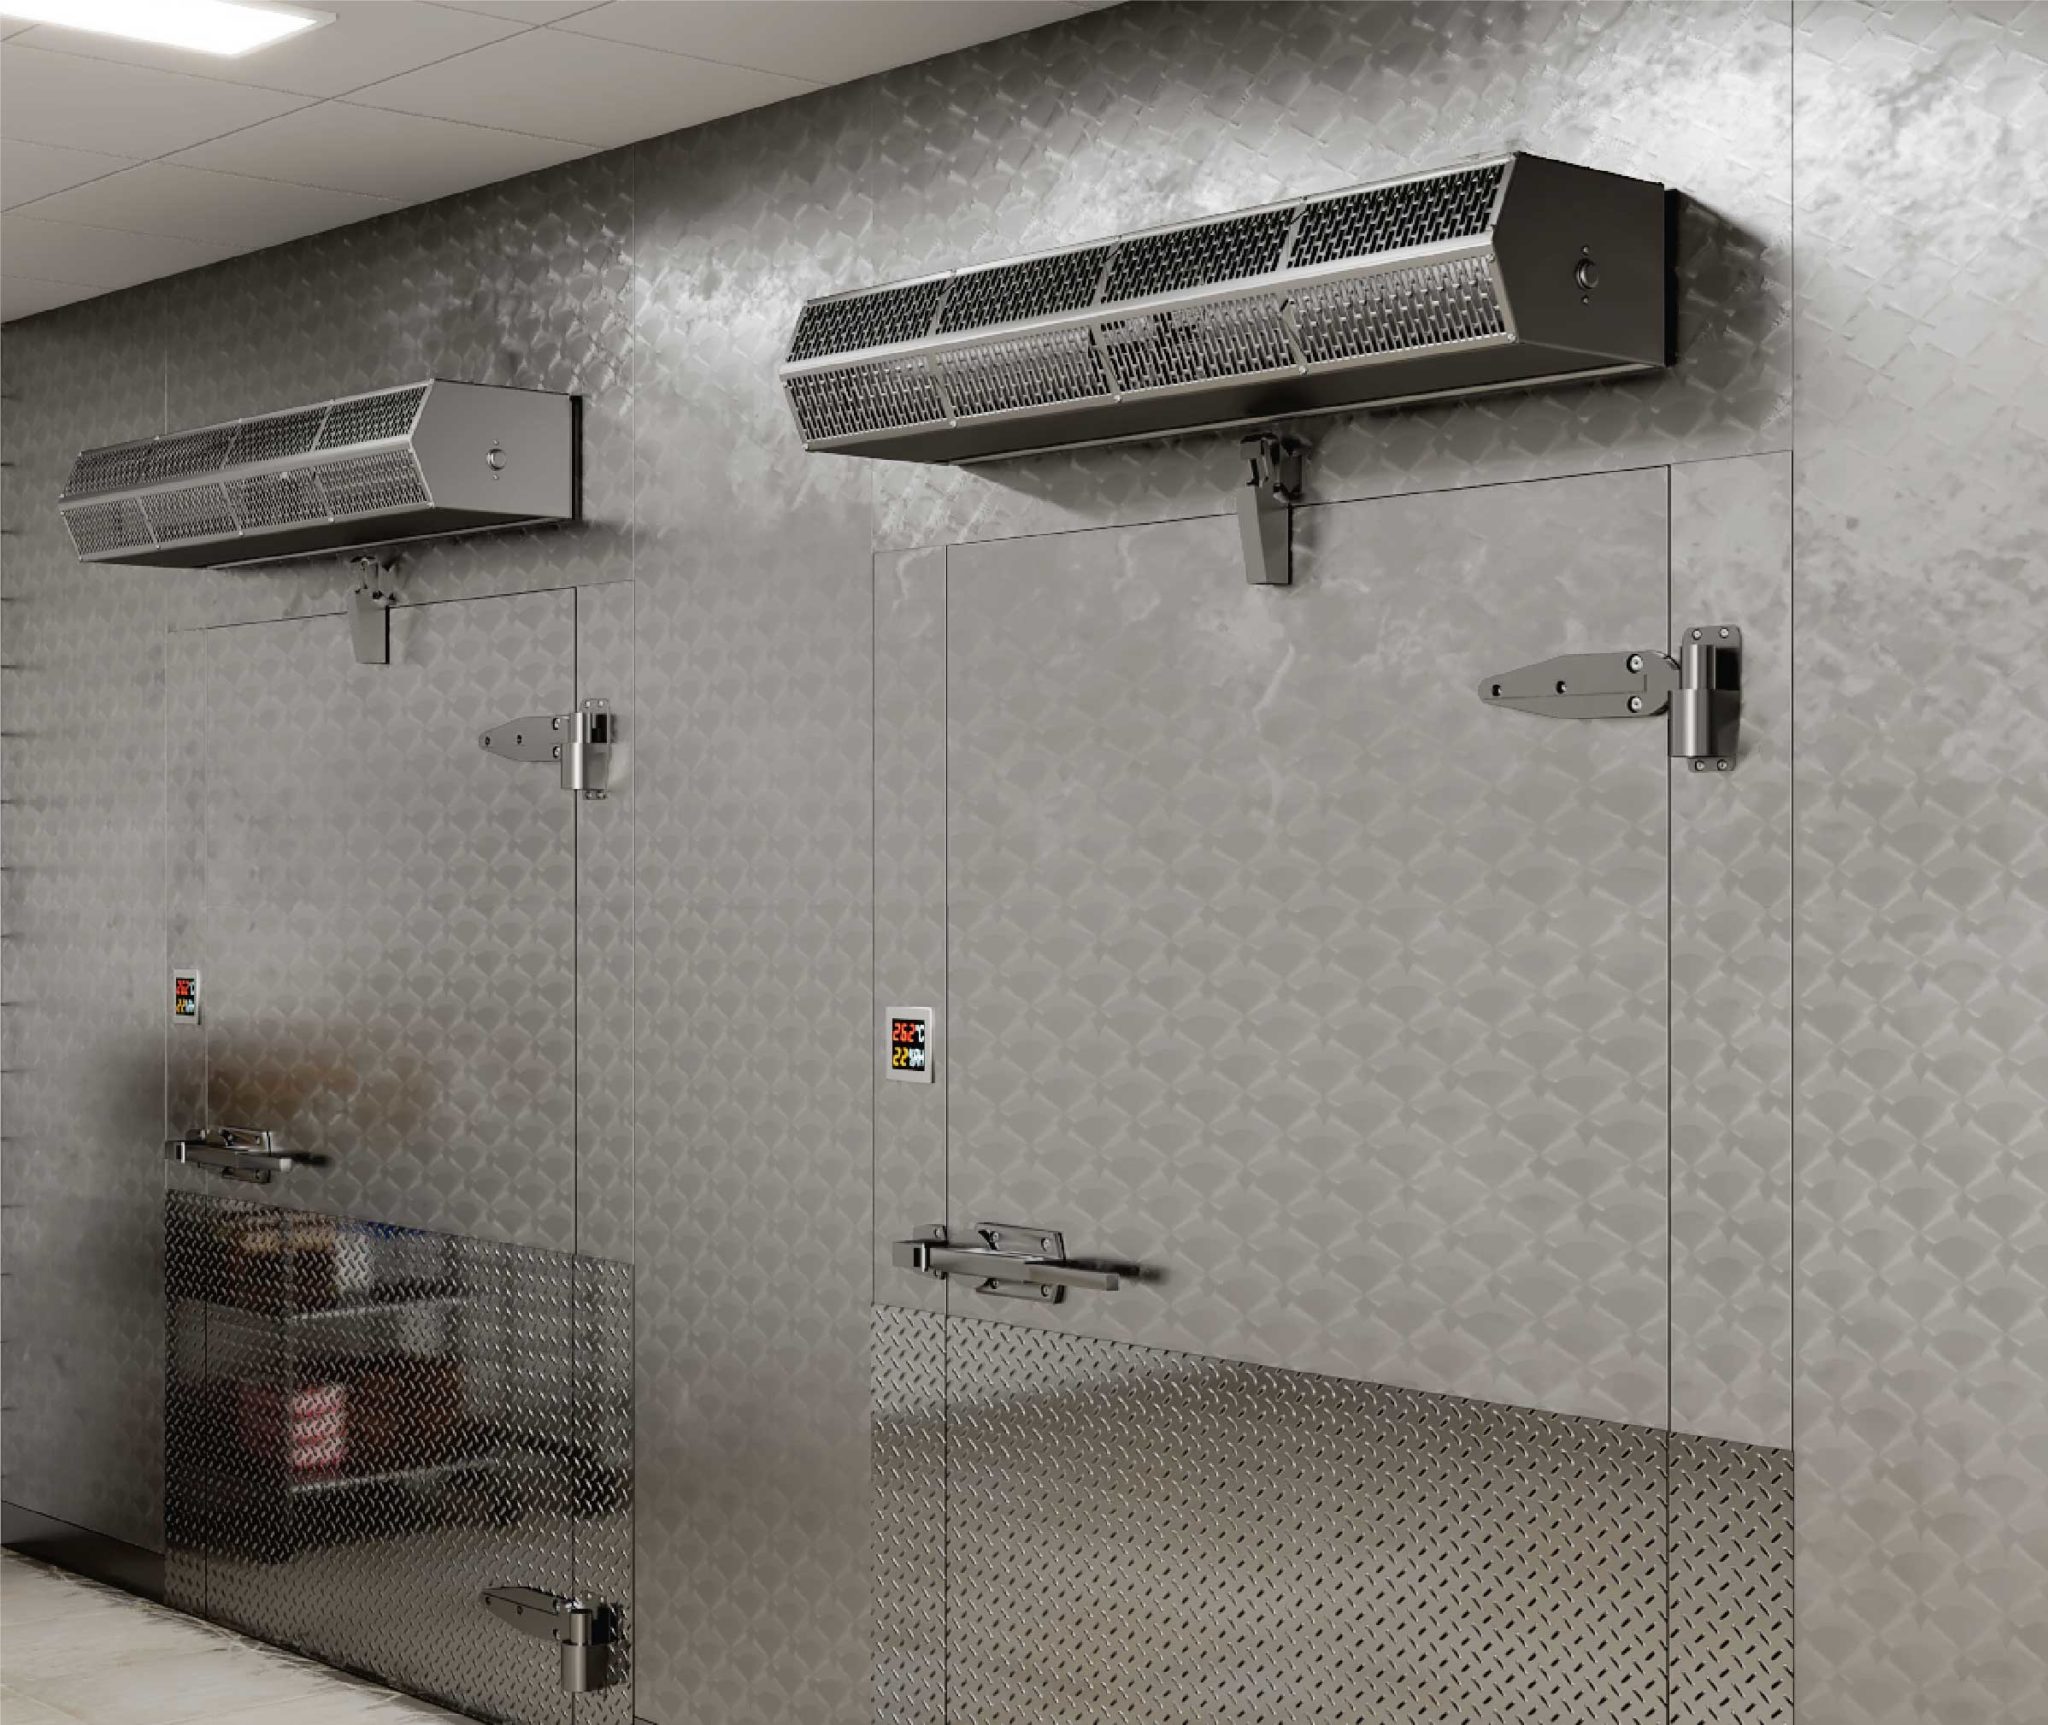 Berner air curtain over cafeteria walk-in cooler.